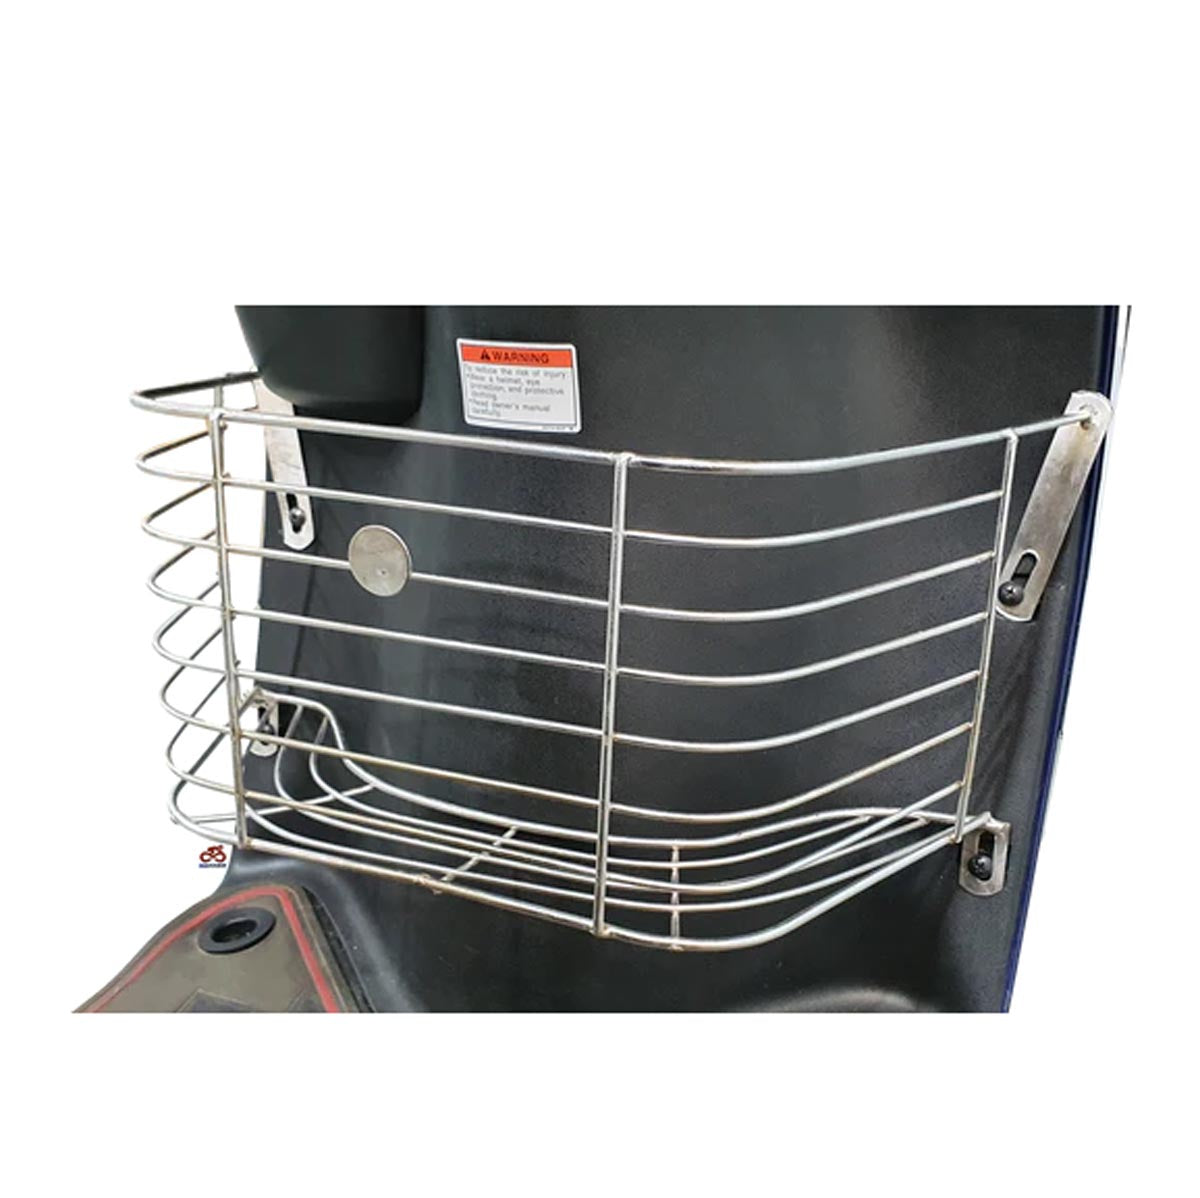 BASKET FOR ACCESS 125 BS6